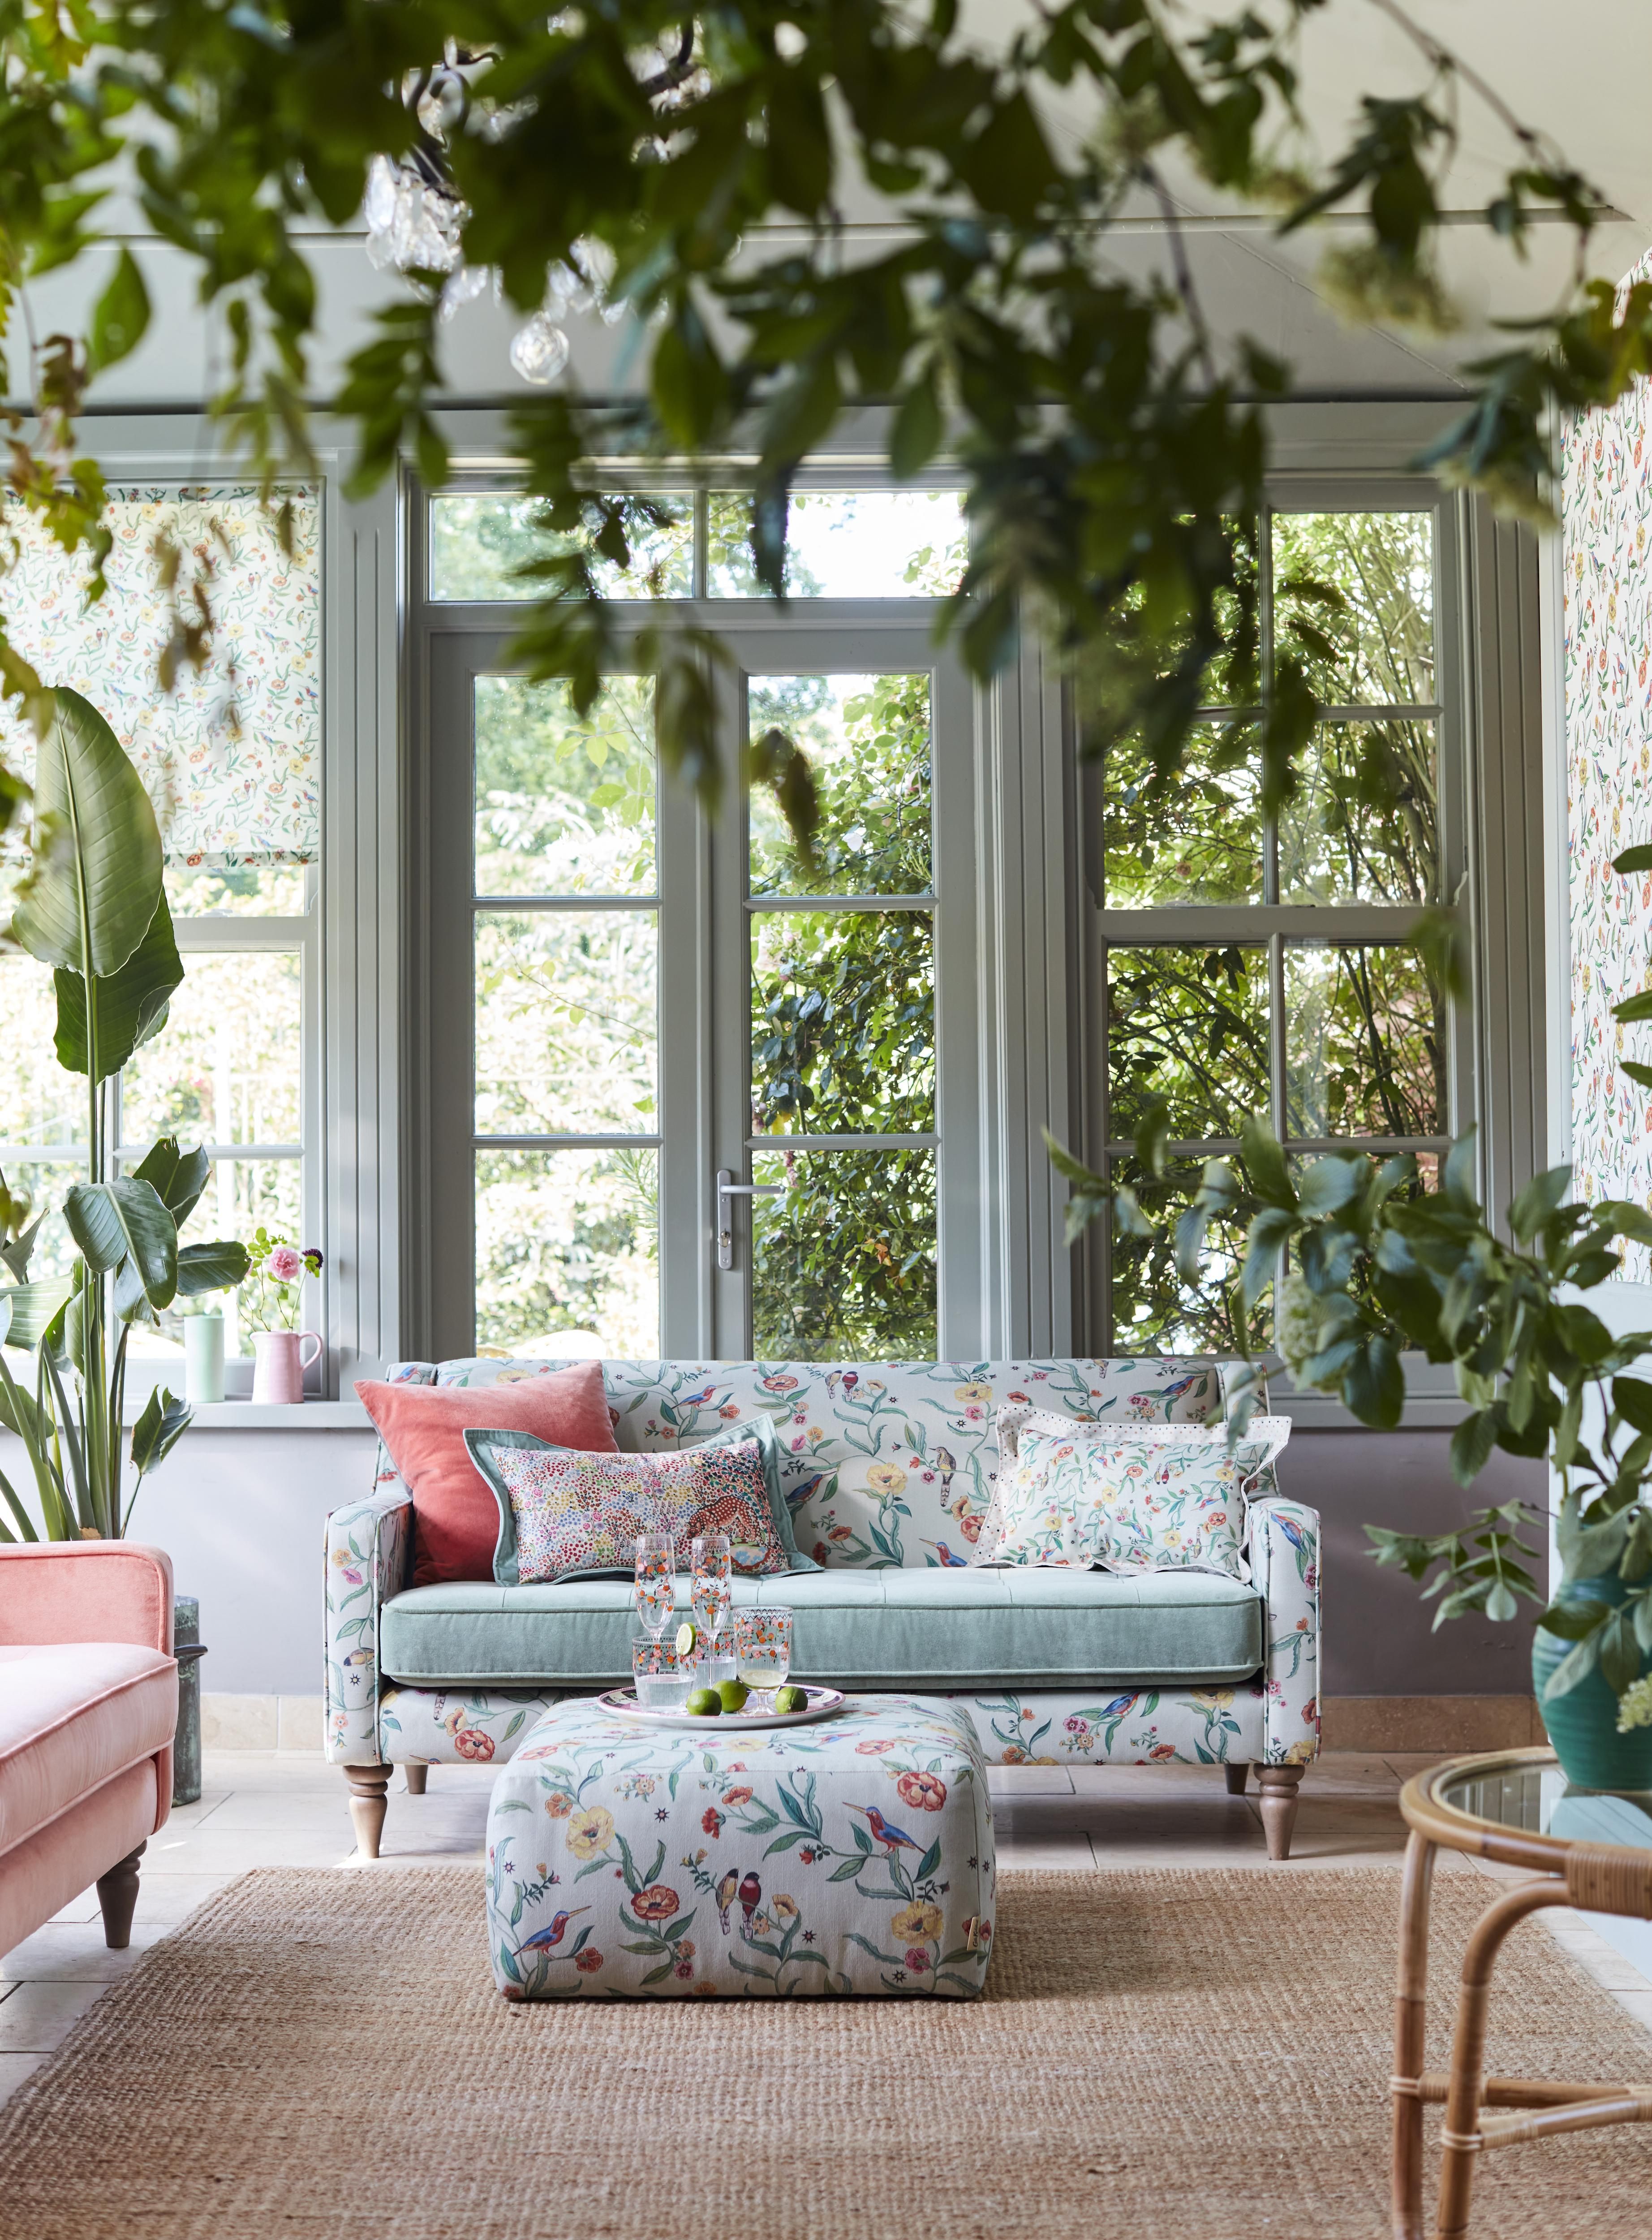 Garden Rooms: 21 Decorating Ideas To Bring The Outdoors In